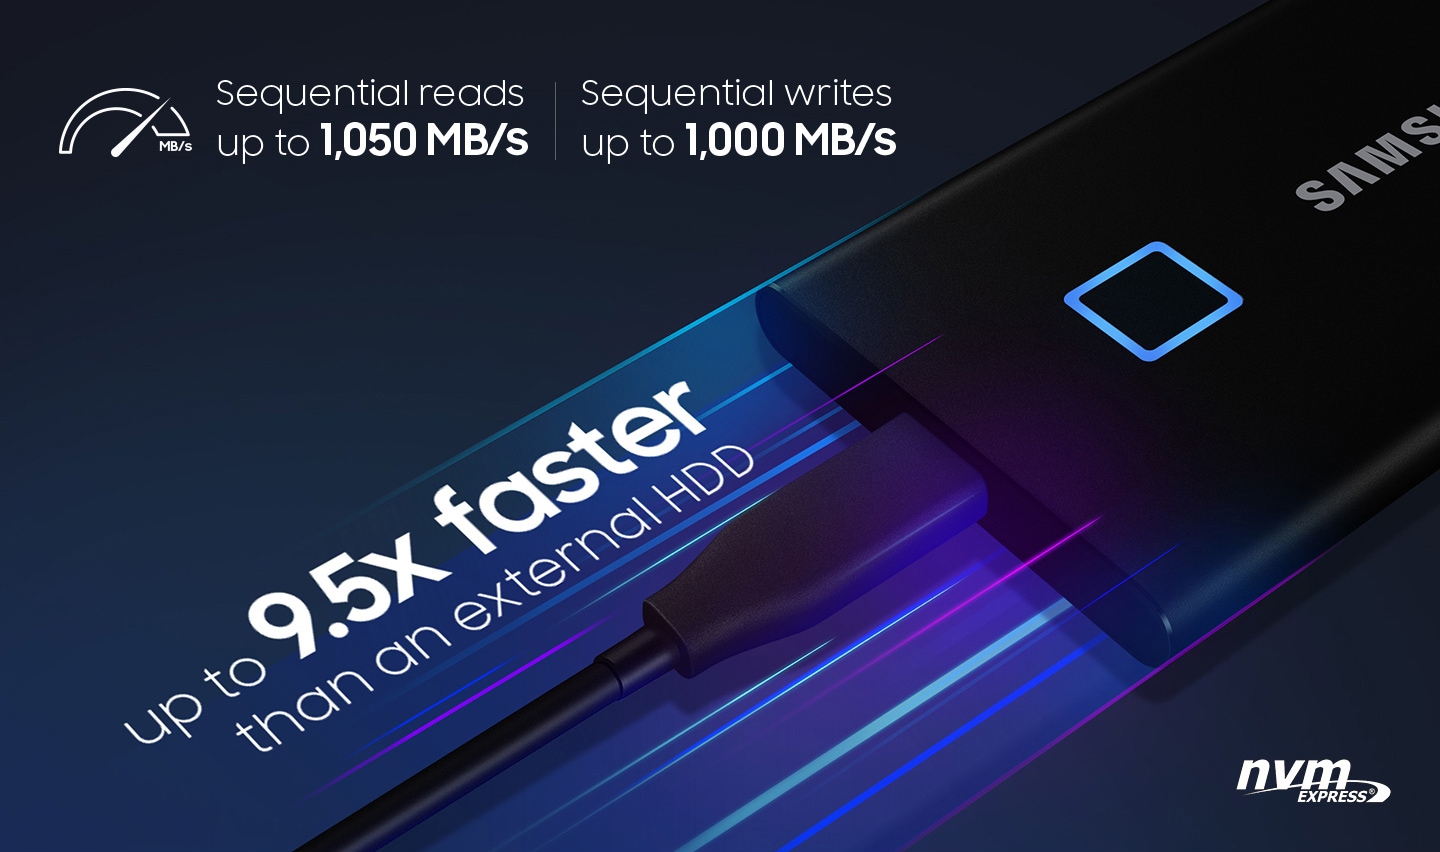 Portable SSD T7 - 9.5x Faster access then External HDD